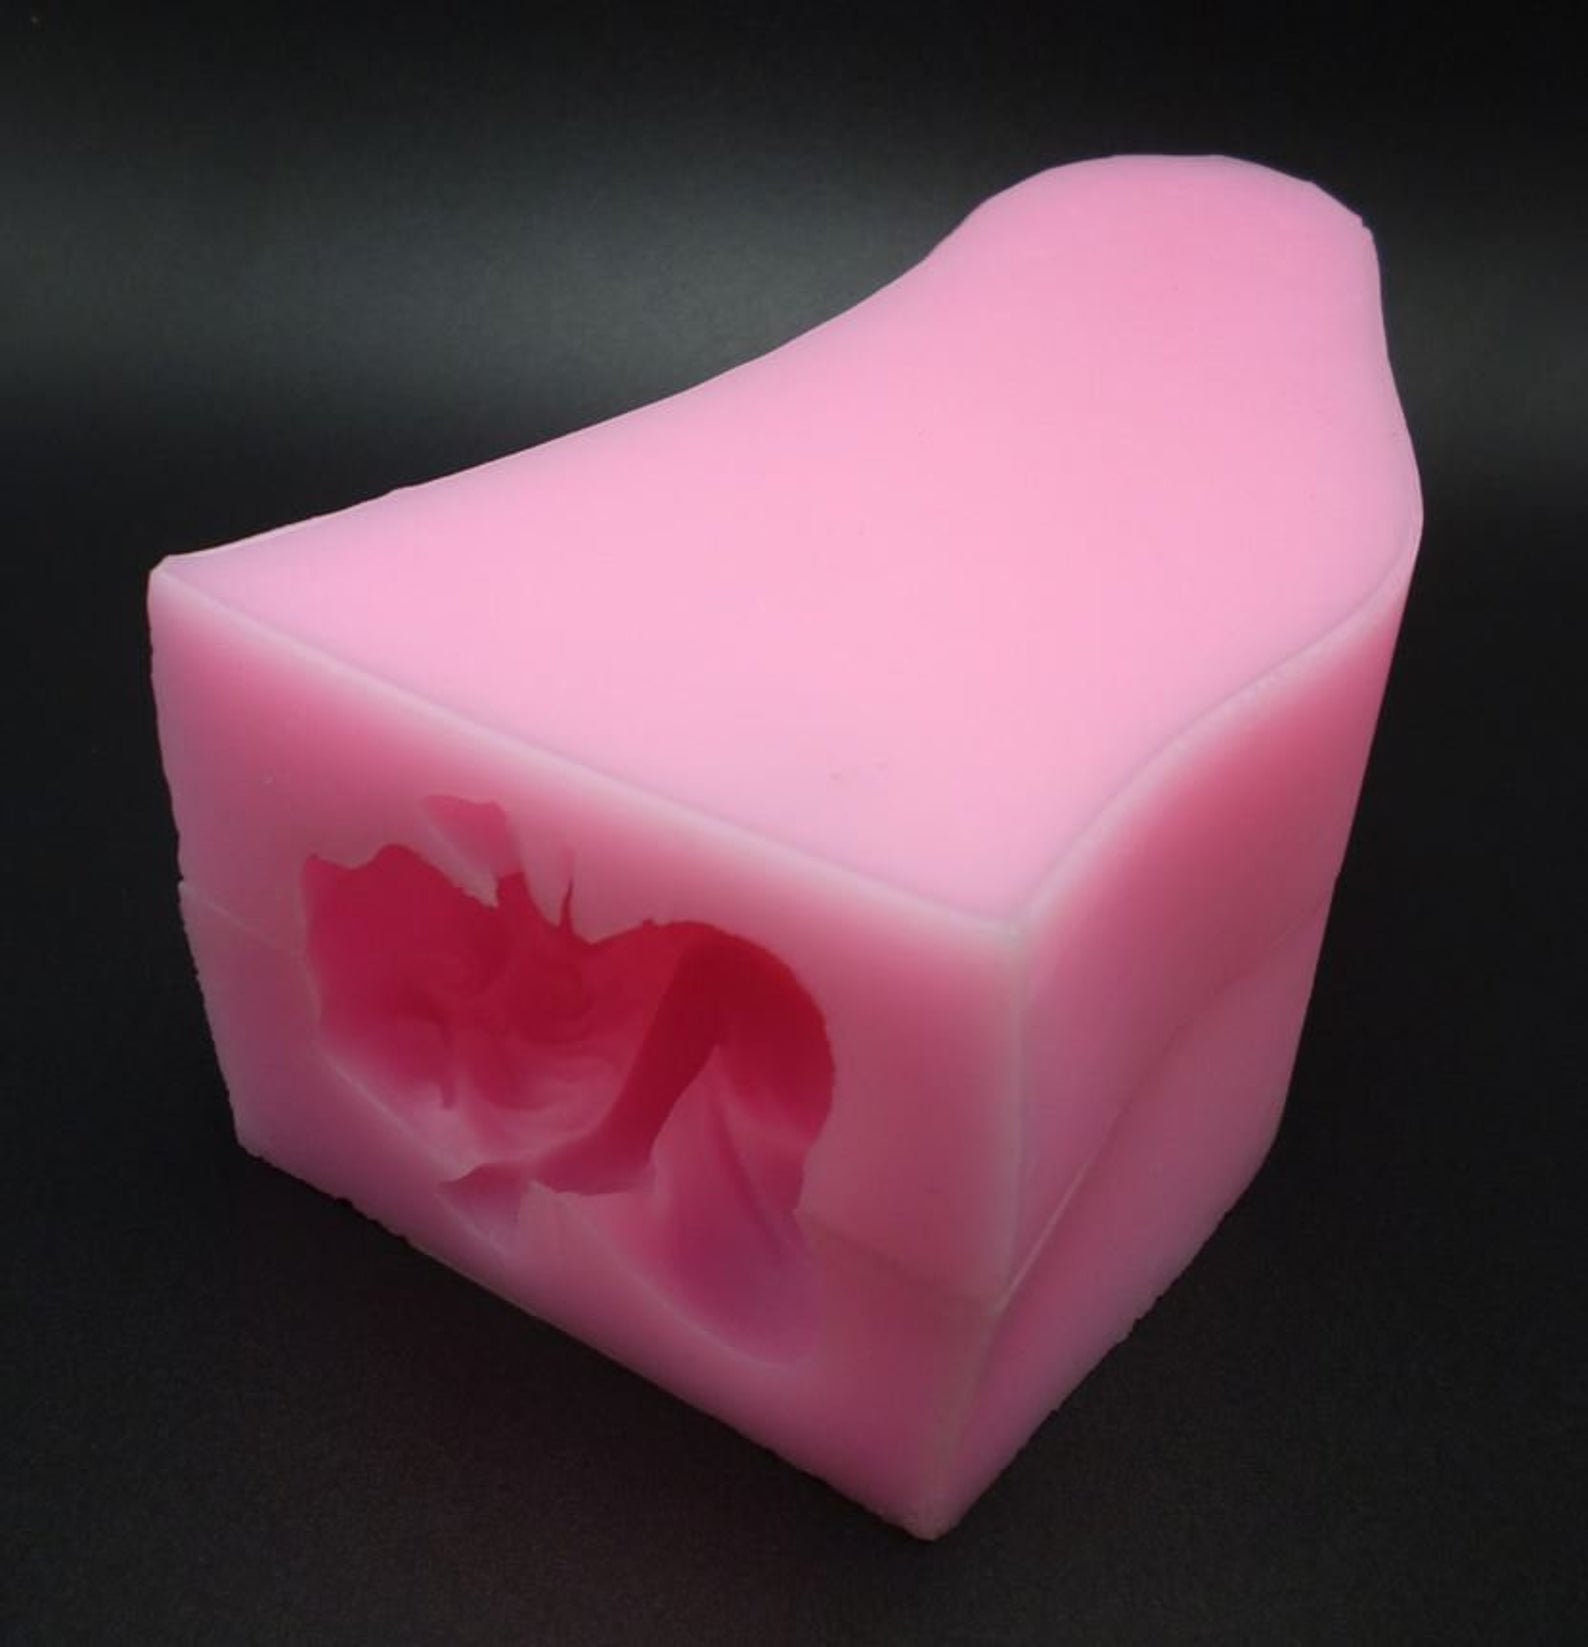 Penis/Willy Candle 1 Cavity Silicone Mold 1396